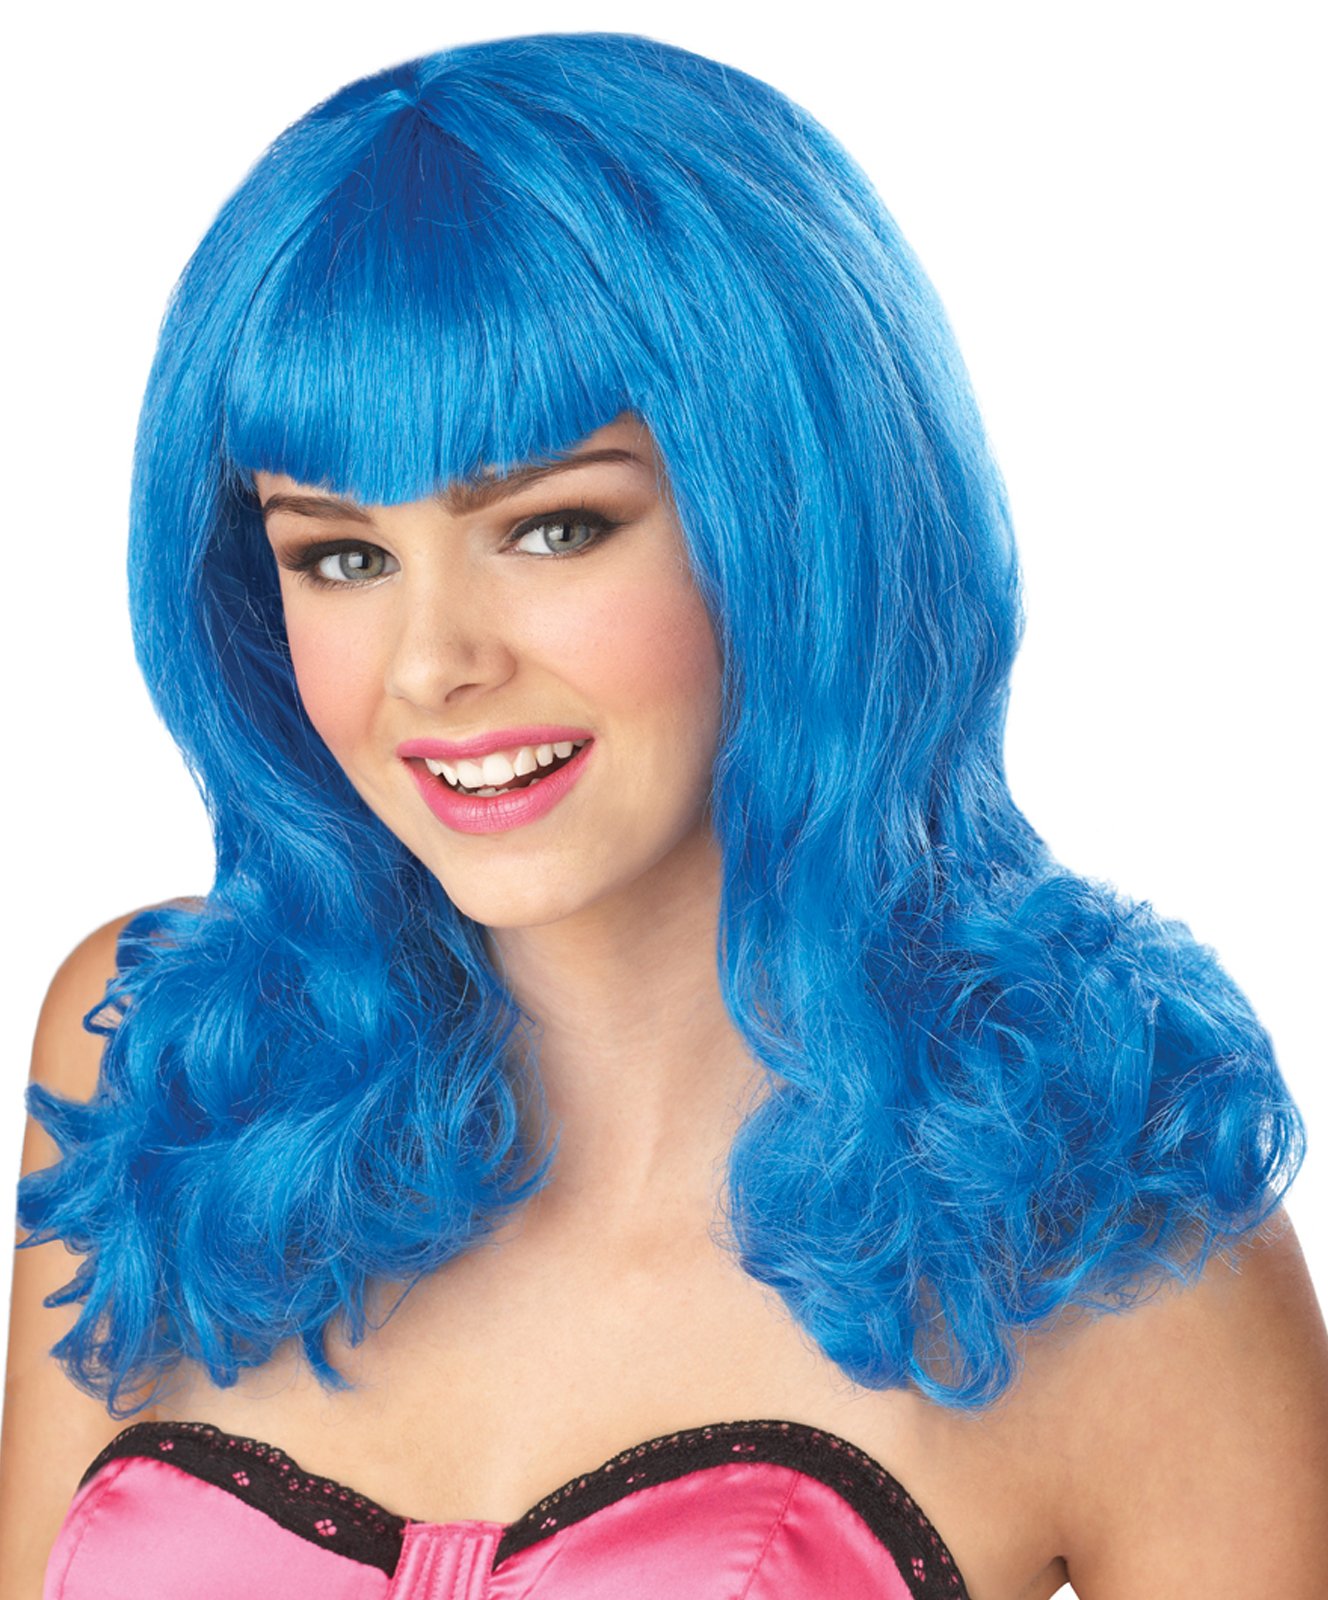 Teenage Dream Adult Wig - Click Image to Close